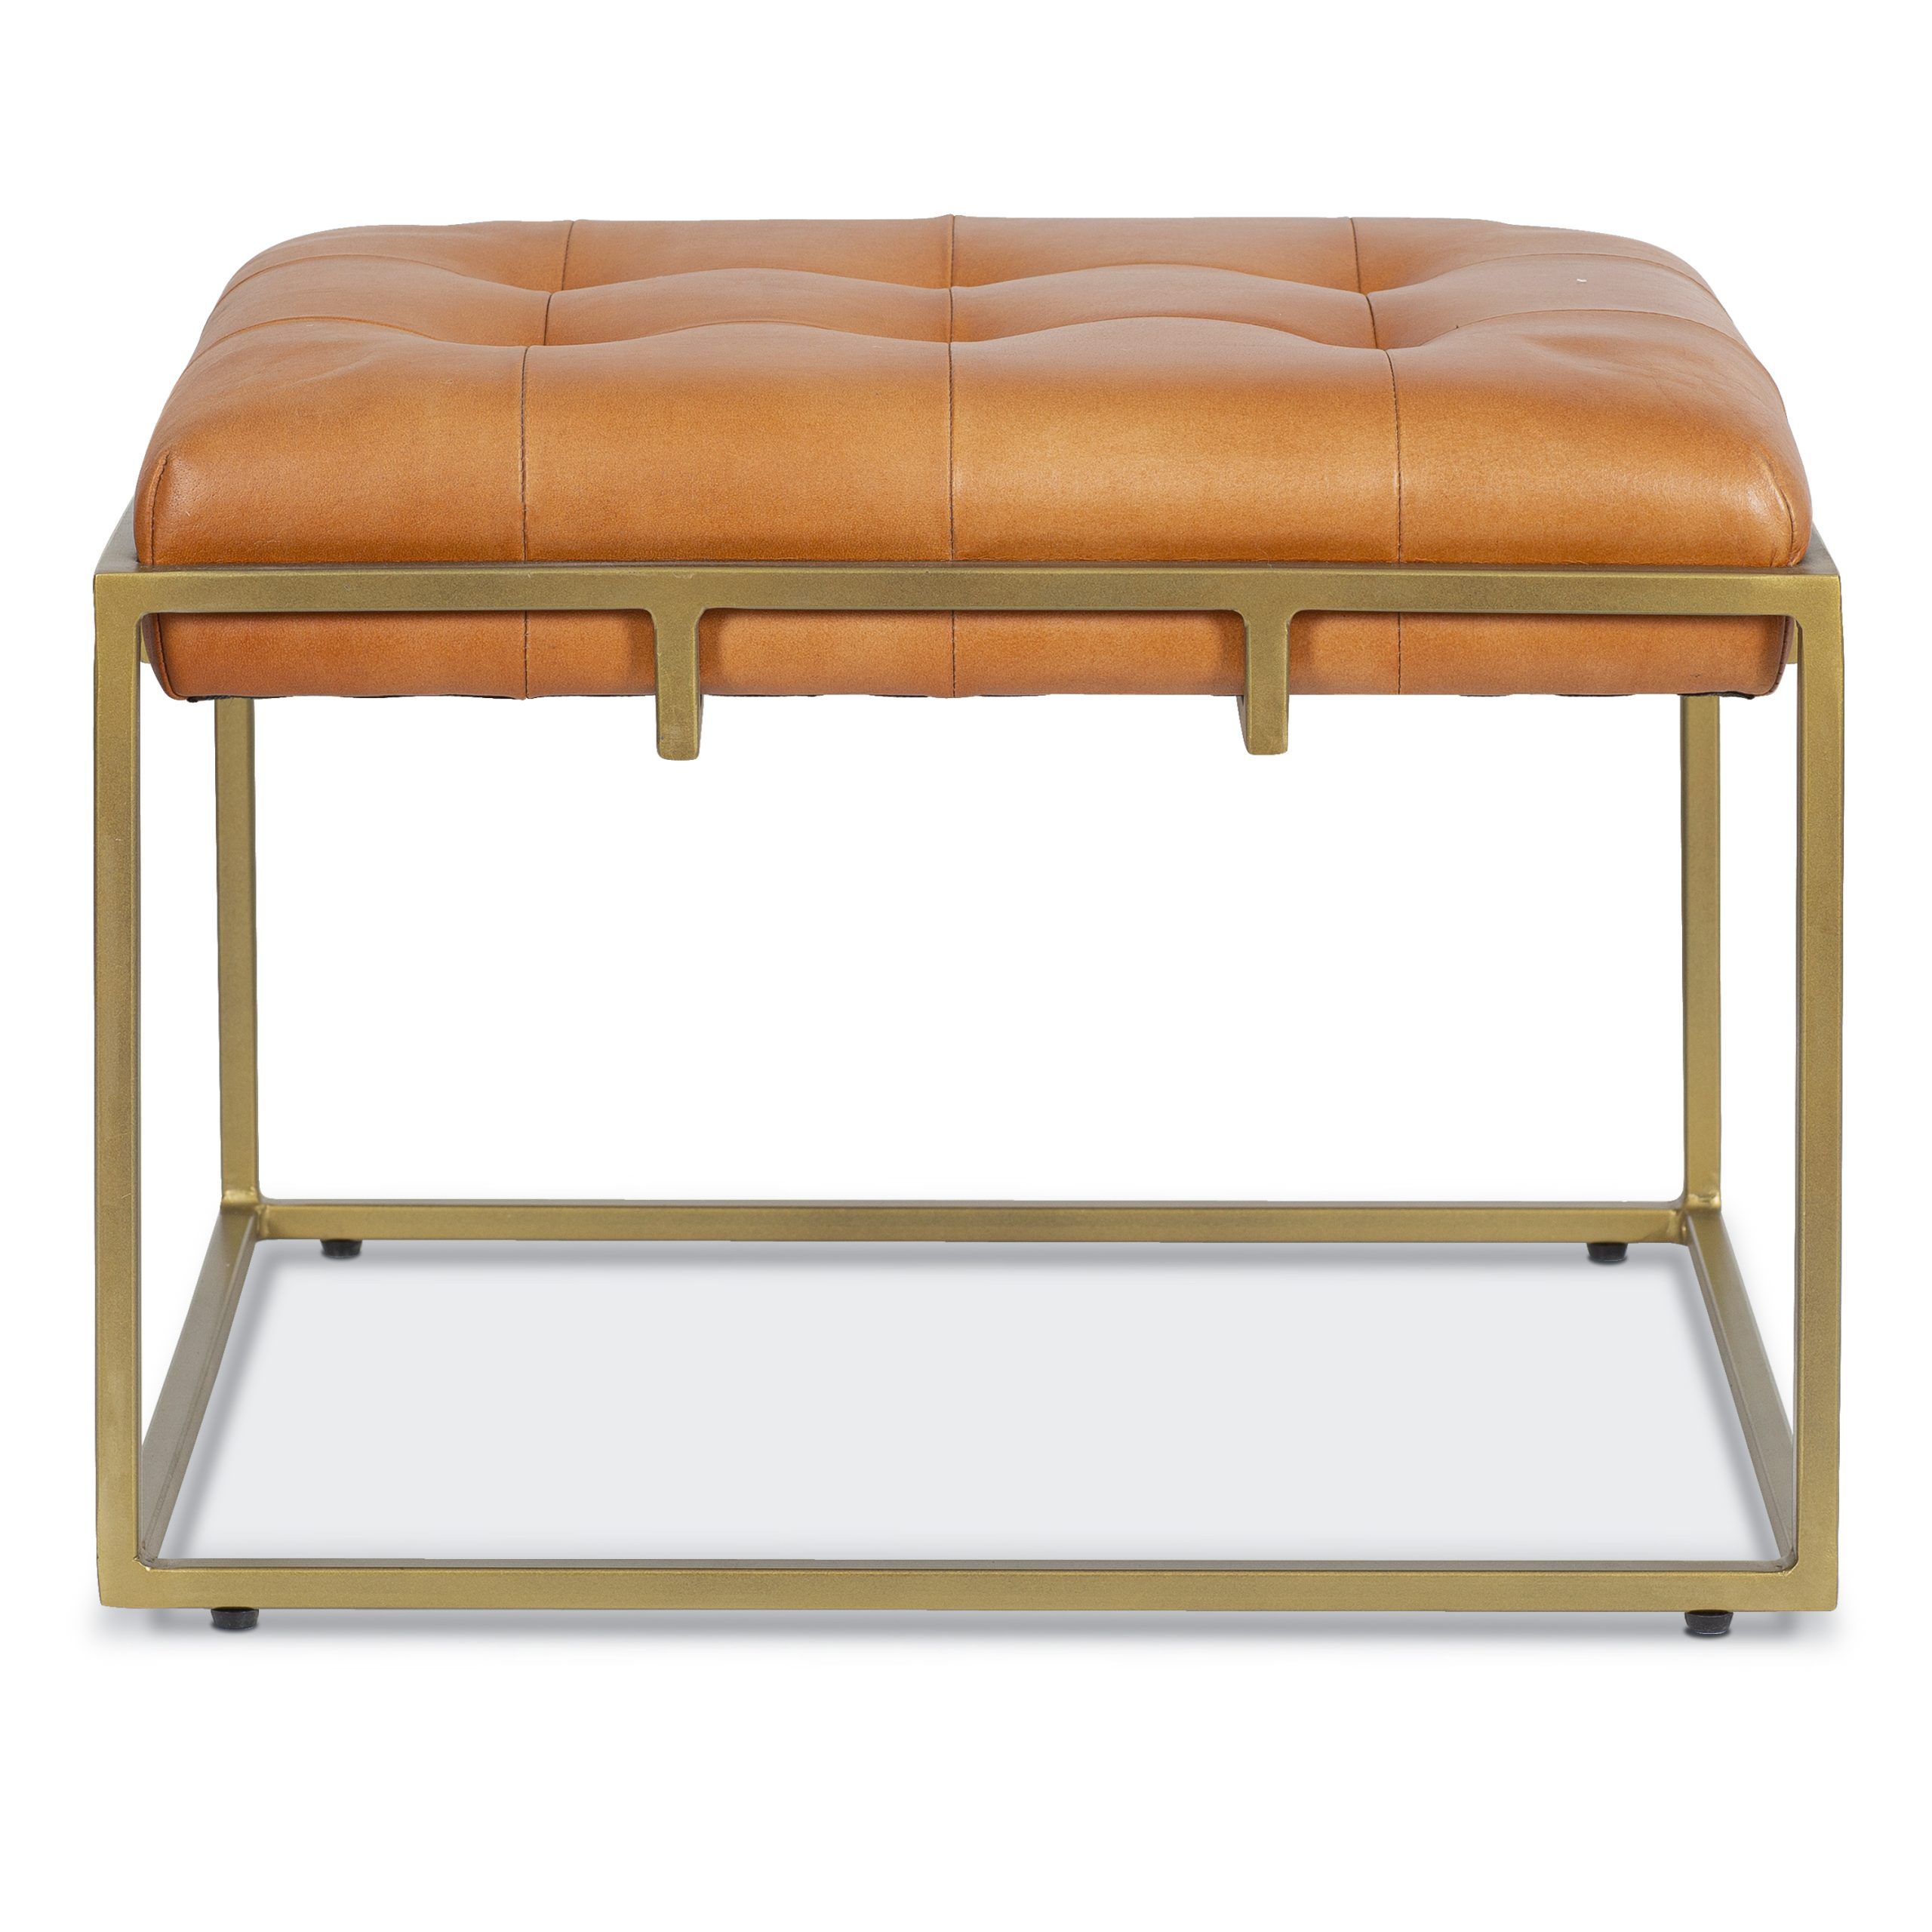 Latest Edgemod Curio 23" Ottoman In Saddle Leather And Antique Brass Legs –  Walmart With Regard To Antique Brass Ottomans (View 10 of 15)